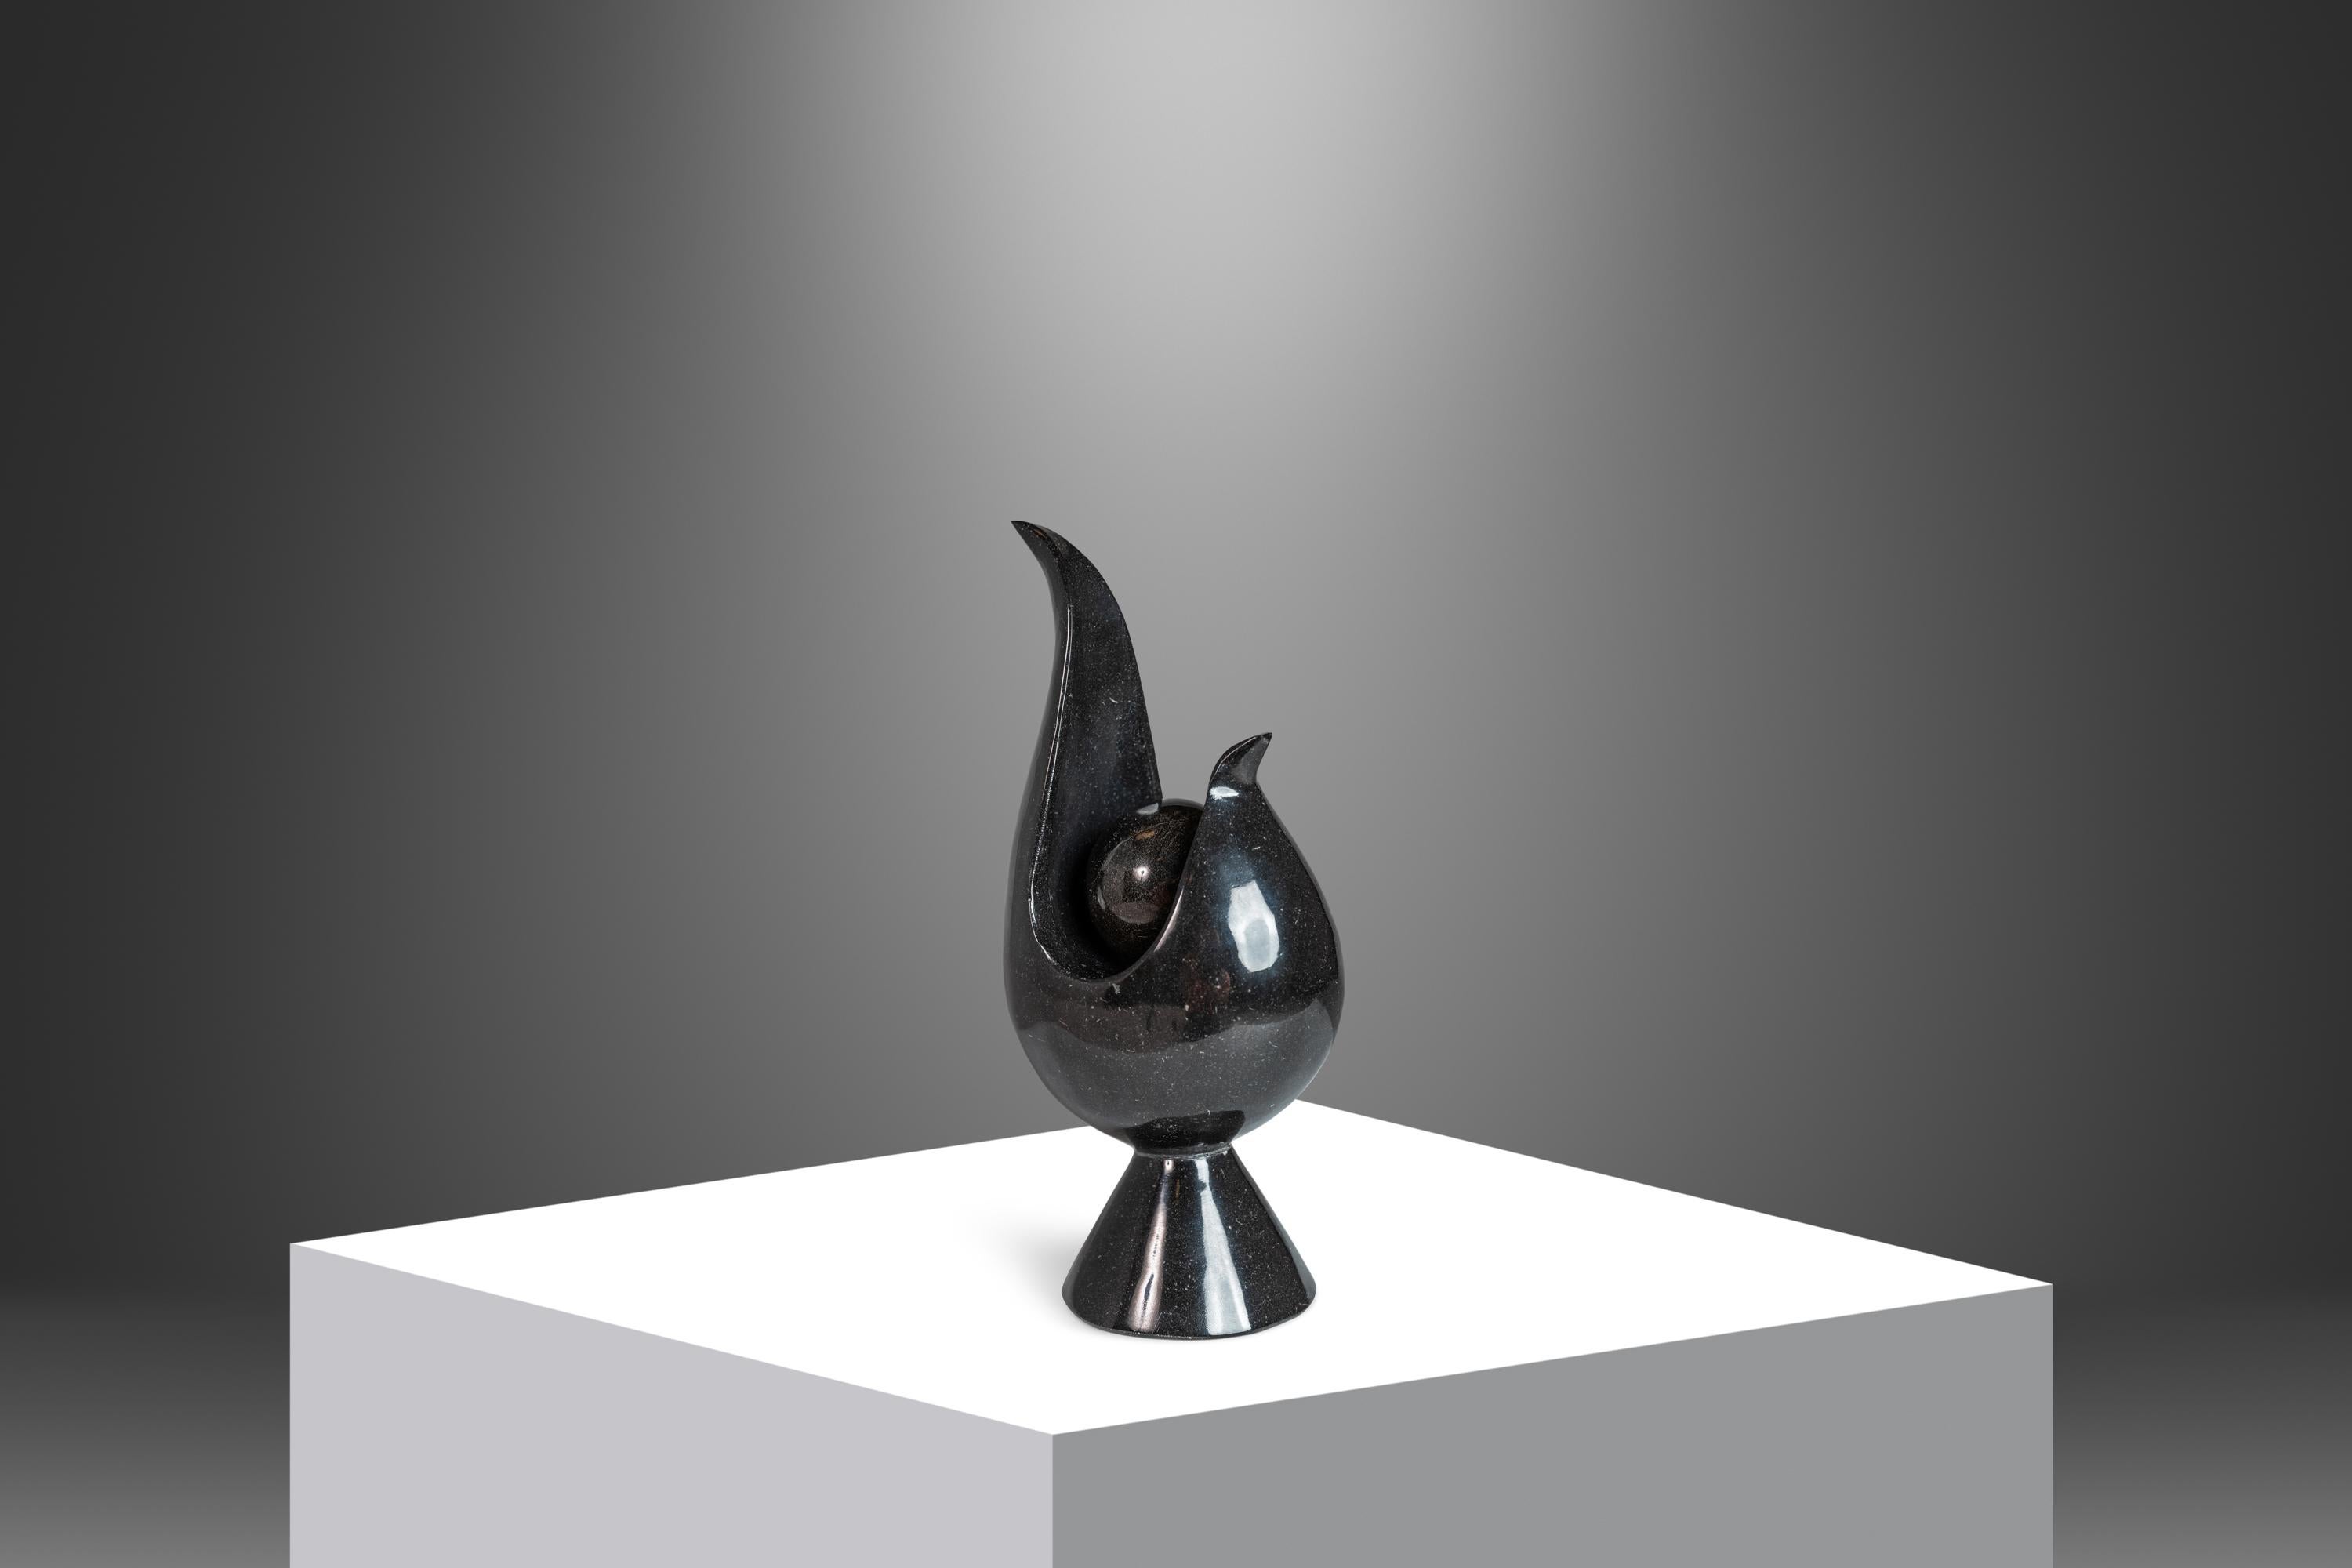 Introducing a fascinating two piece Post Modern sculpture cut from solid black marble and hand-polished to a brilliant shine. Featuring a sphere that rests within the confines of the main sculpture this two-in-one piece is absolutely alluring and